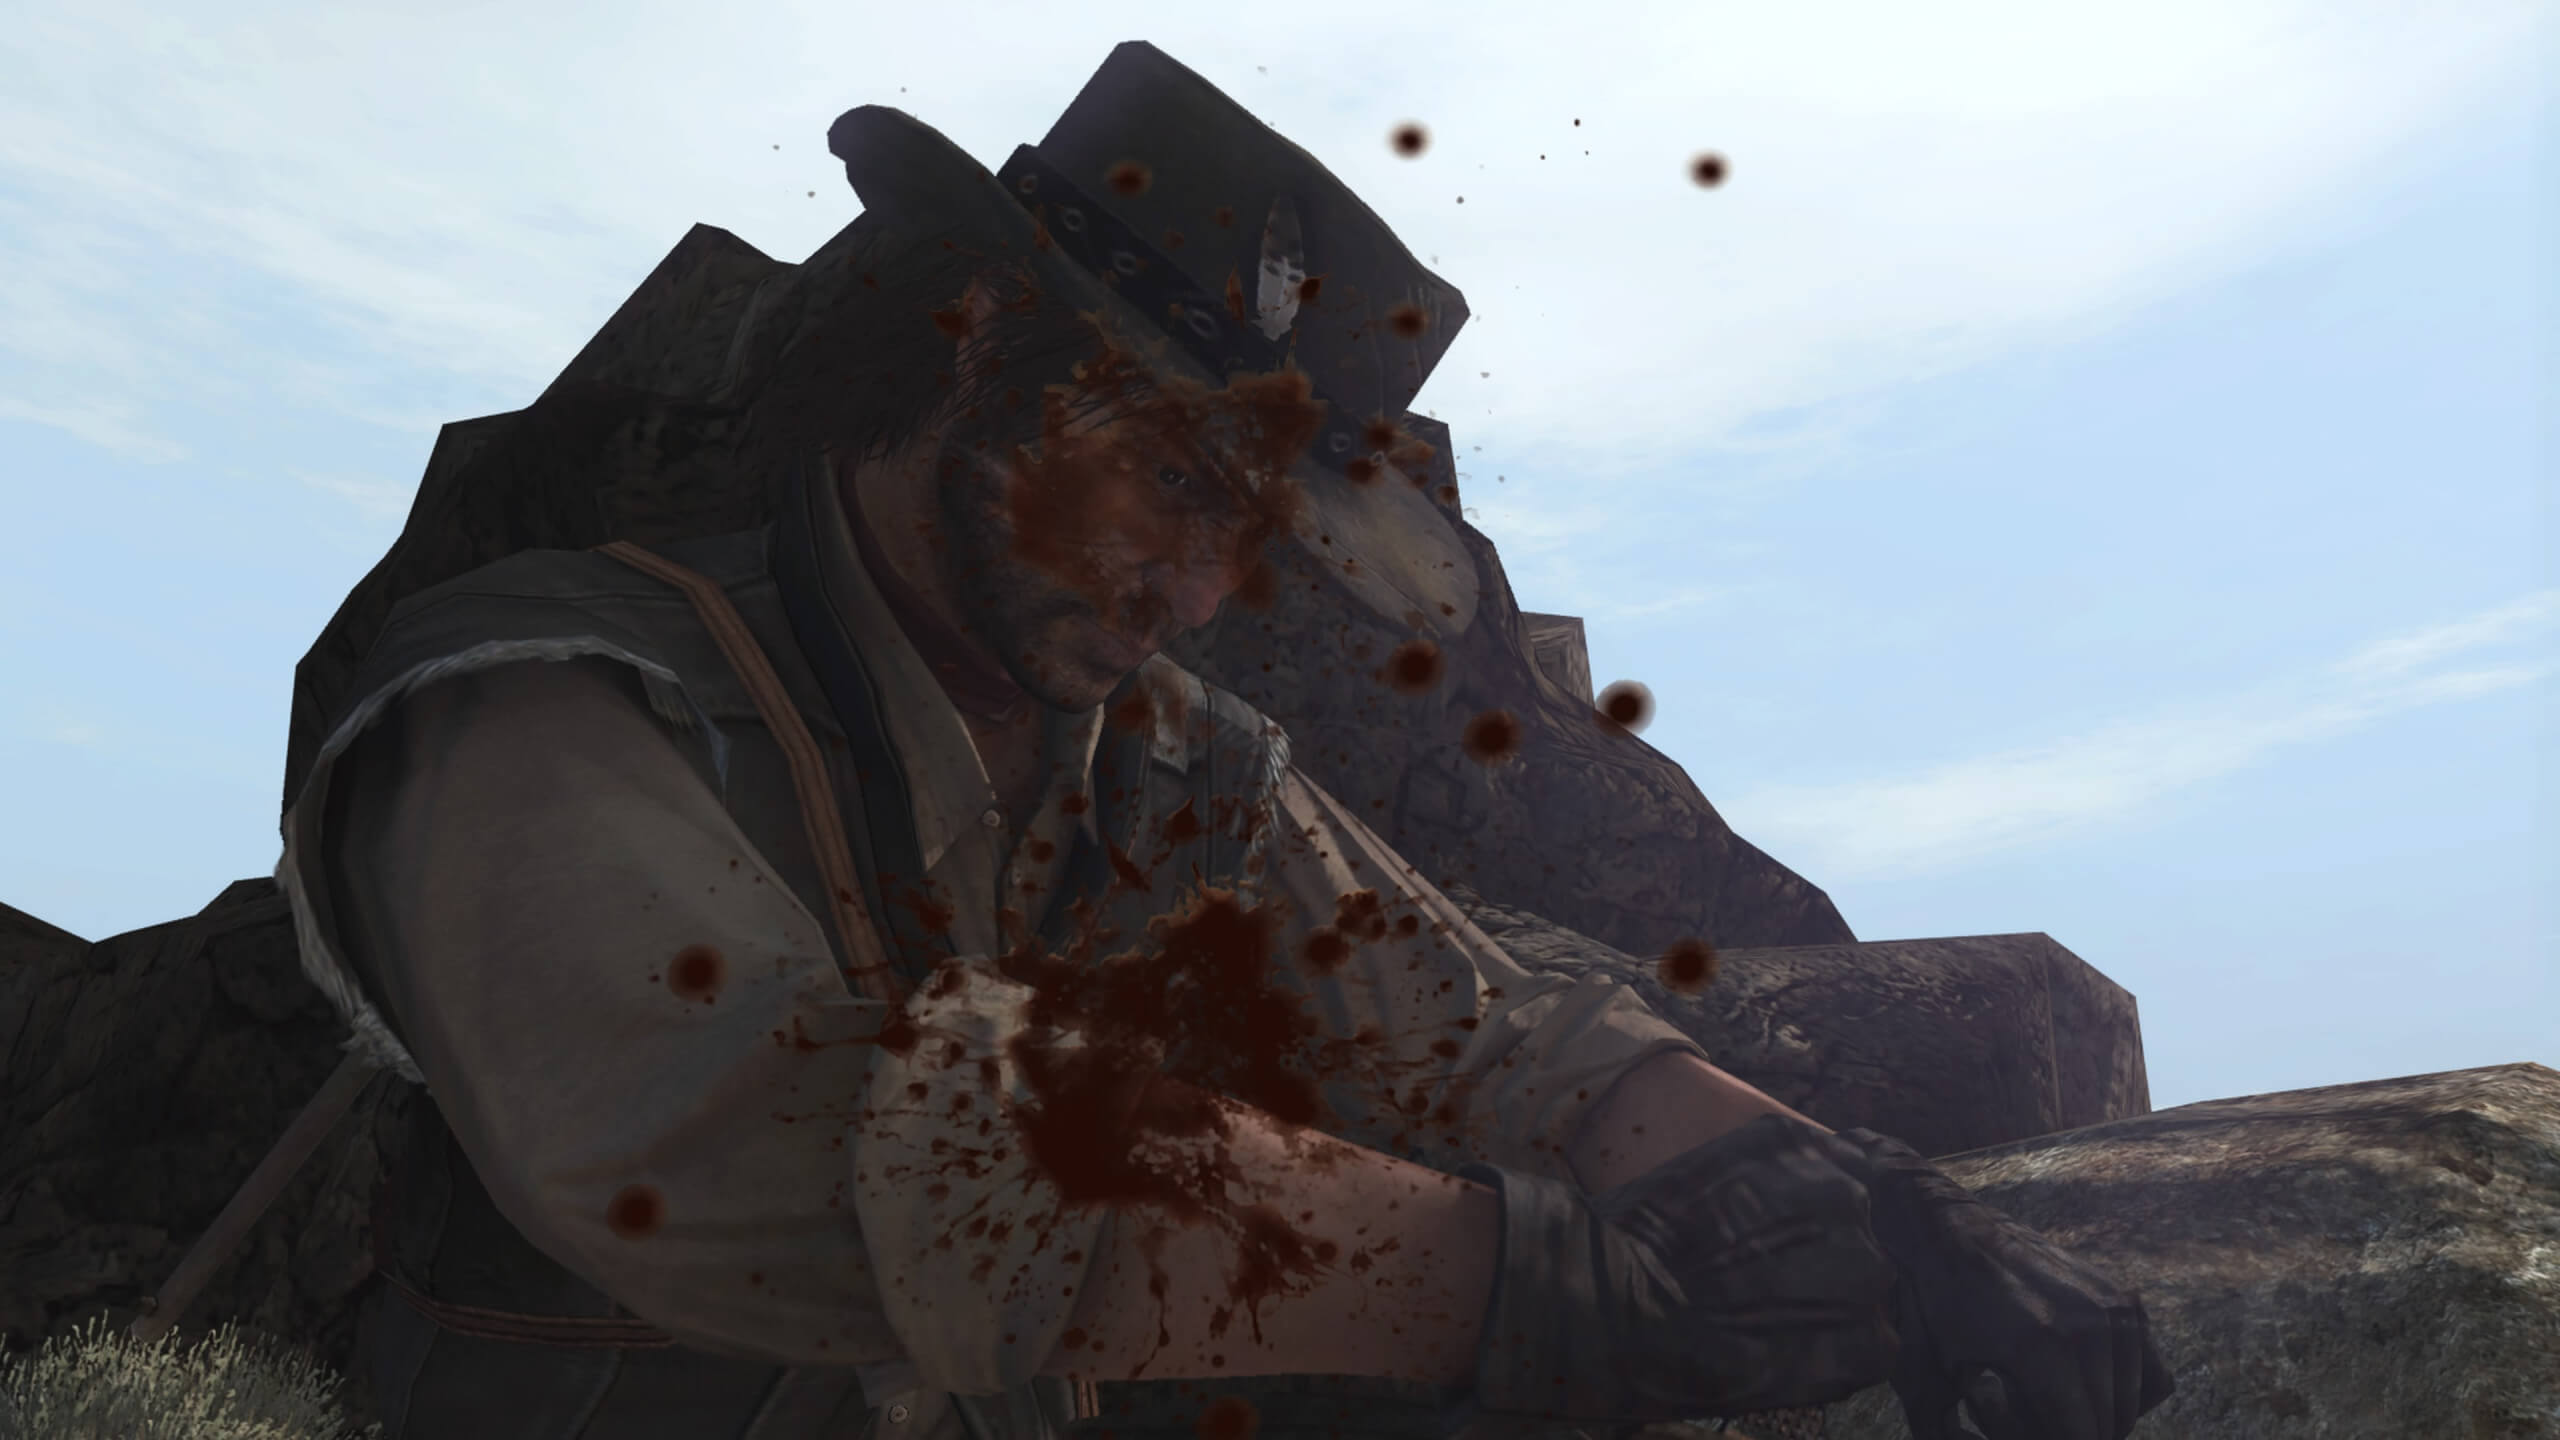 Our protagonist John is covered in blood after hunting and skinning an animal